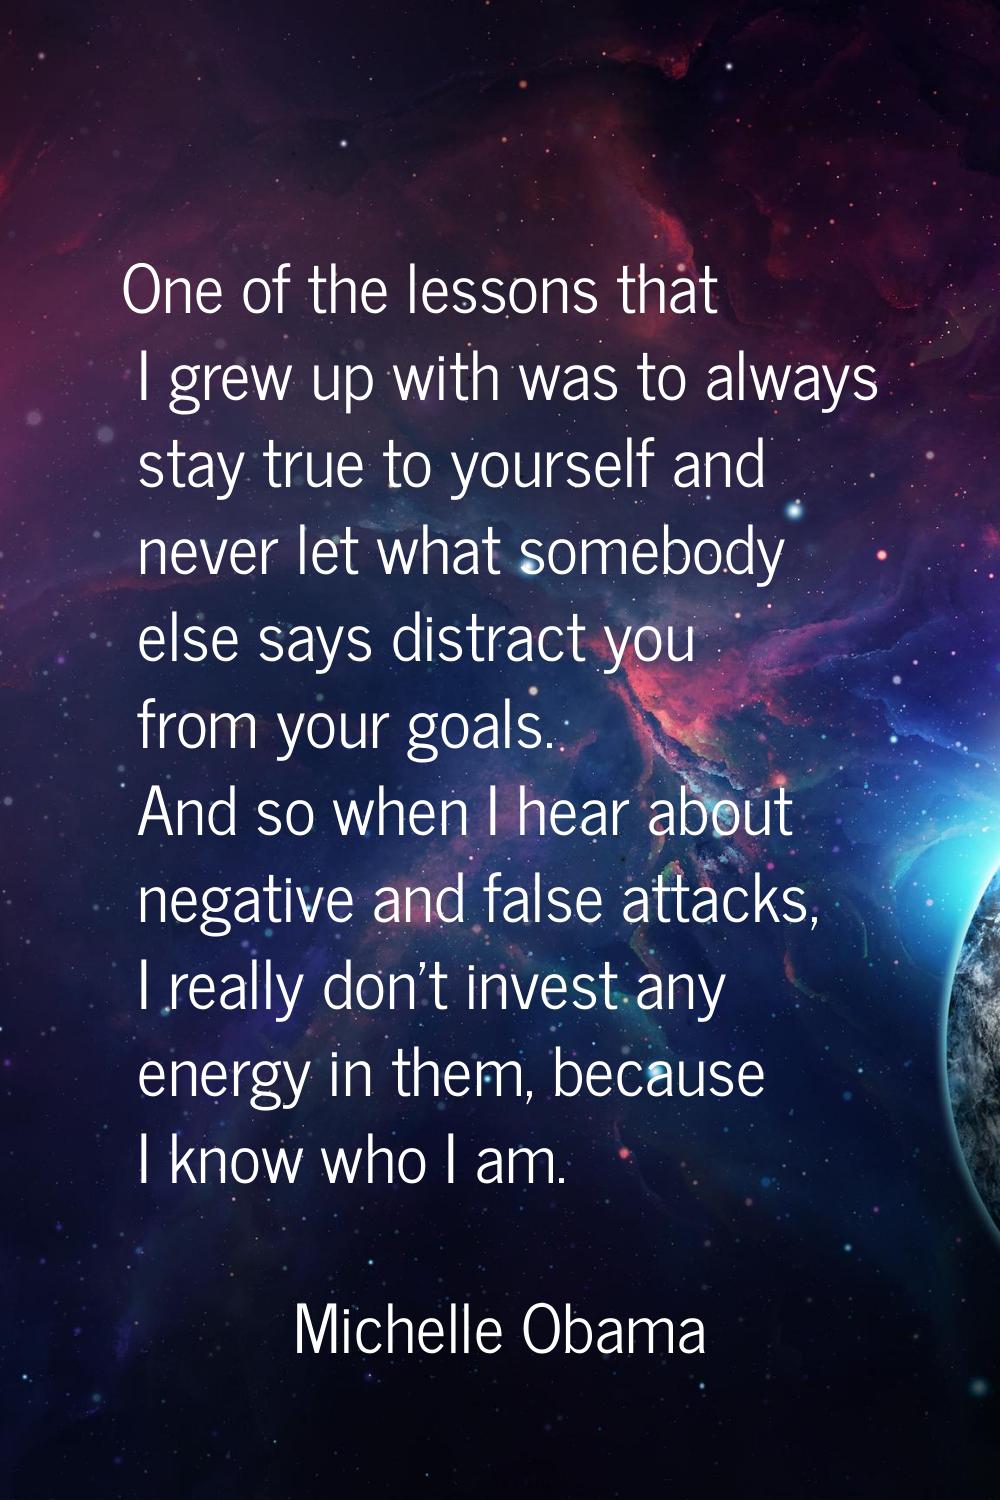 One of the lessons that I grew up with was to always stay true to yourself and never let what someb